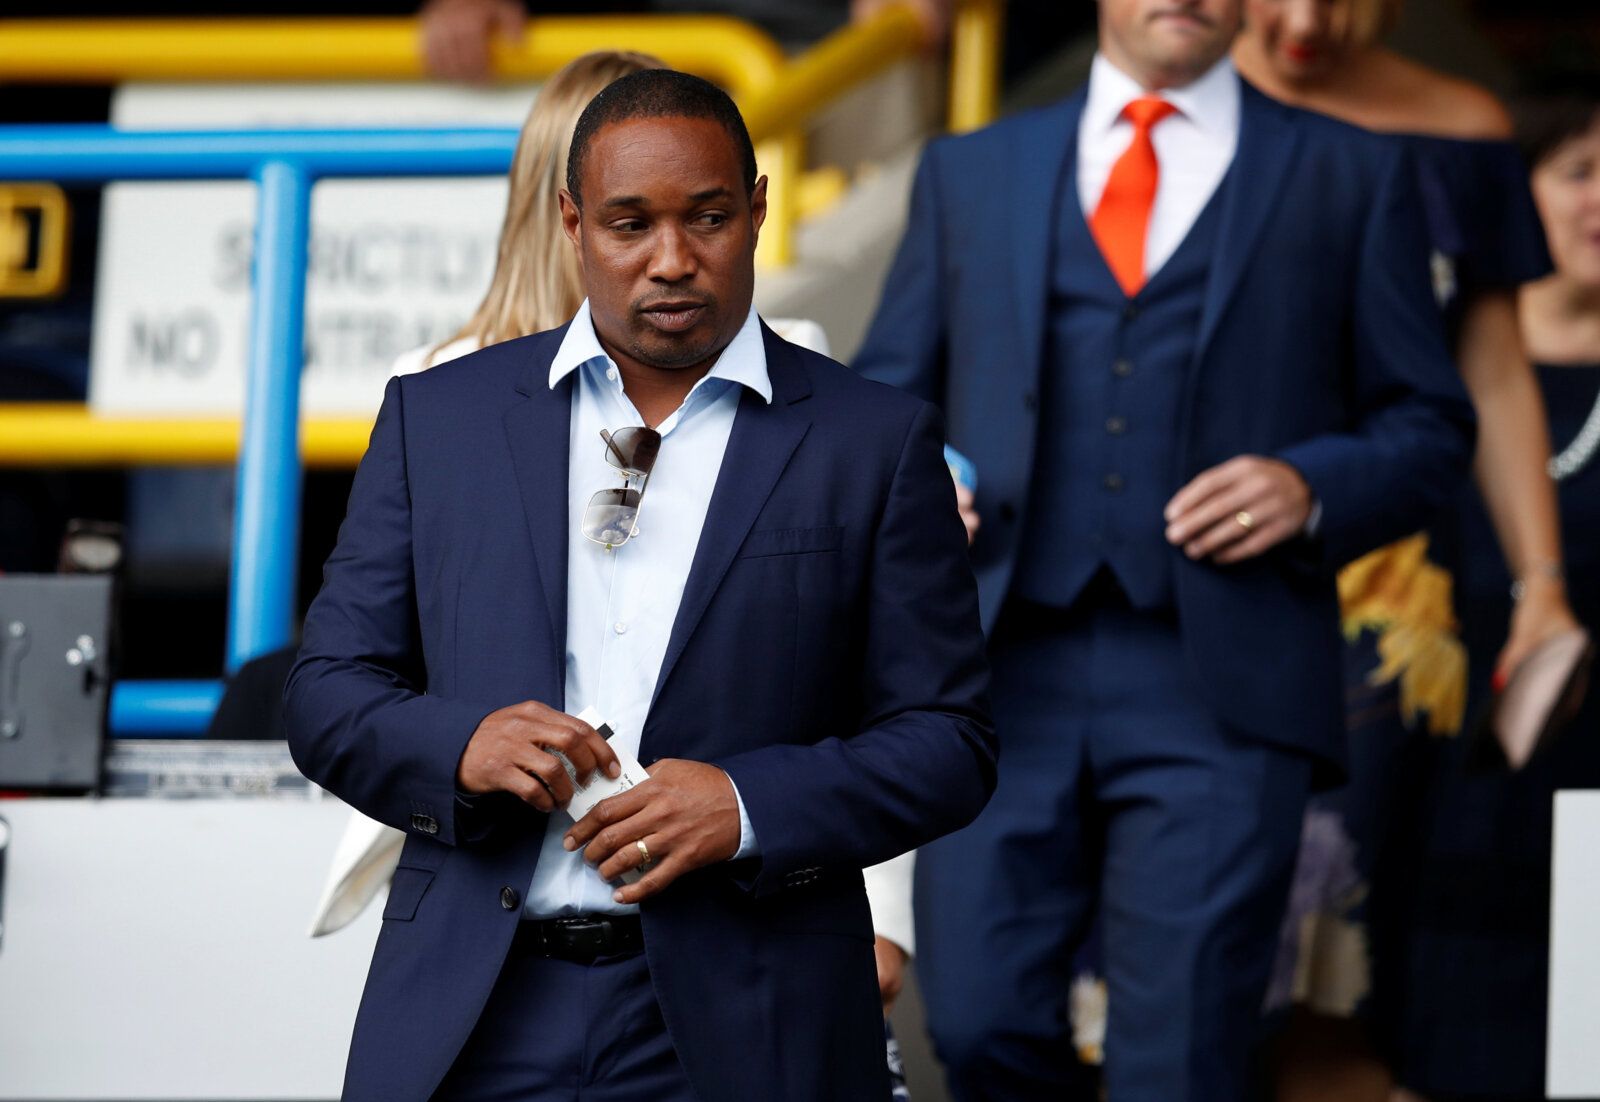 Soccer Football - Premier League - Huddersfield Town vs Southampton - Huddersfield, Britain - August 26, 2017 Paul Ince, father of Huddersfield's Tom Ince, arrives at the match REUTERS/Phil Noble EDITORIAL USE ONLY. No use with unauthorized audio, video, data, fixture lists, club/league logos or 